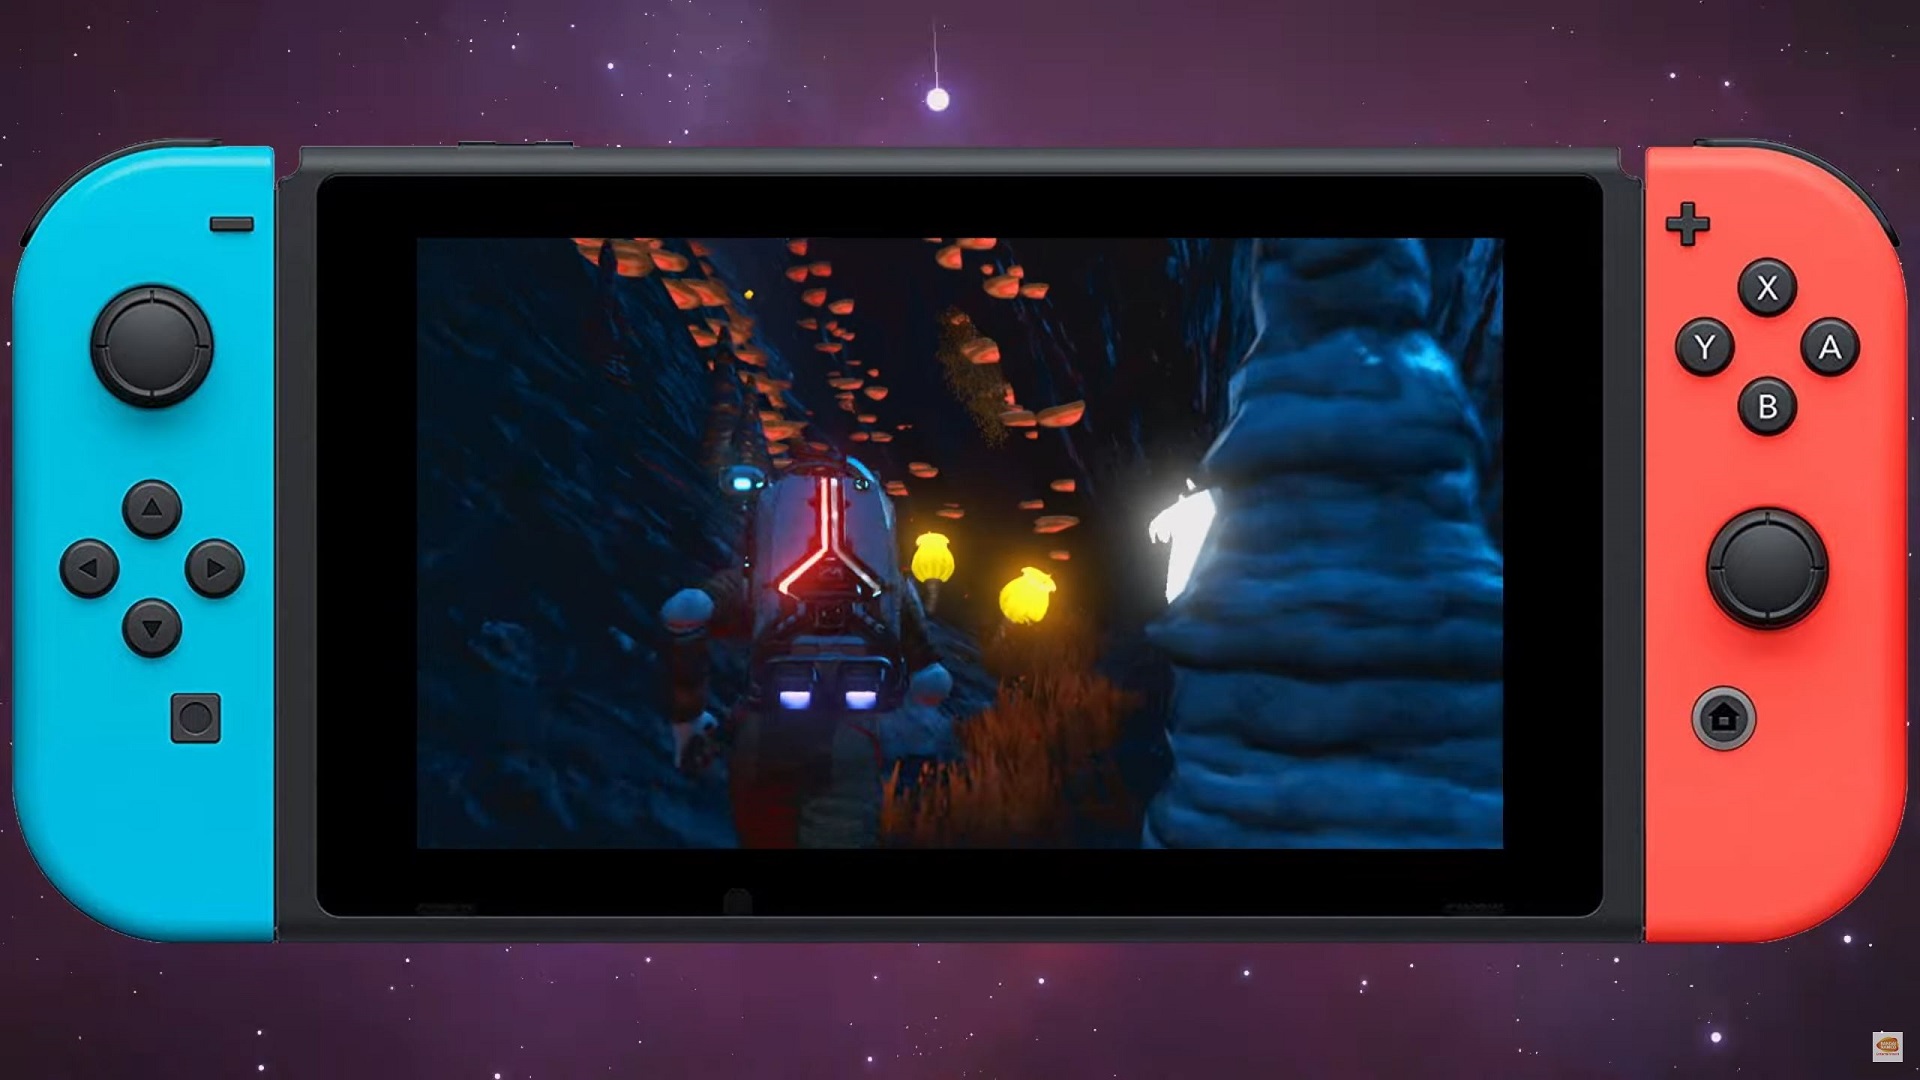 No Man's Sky being played on a Nintendo Switch